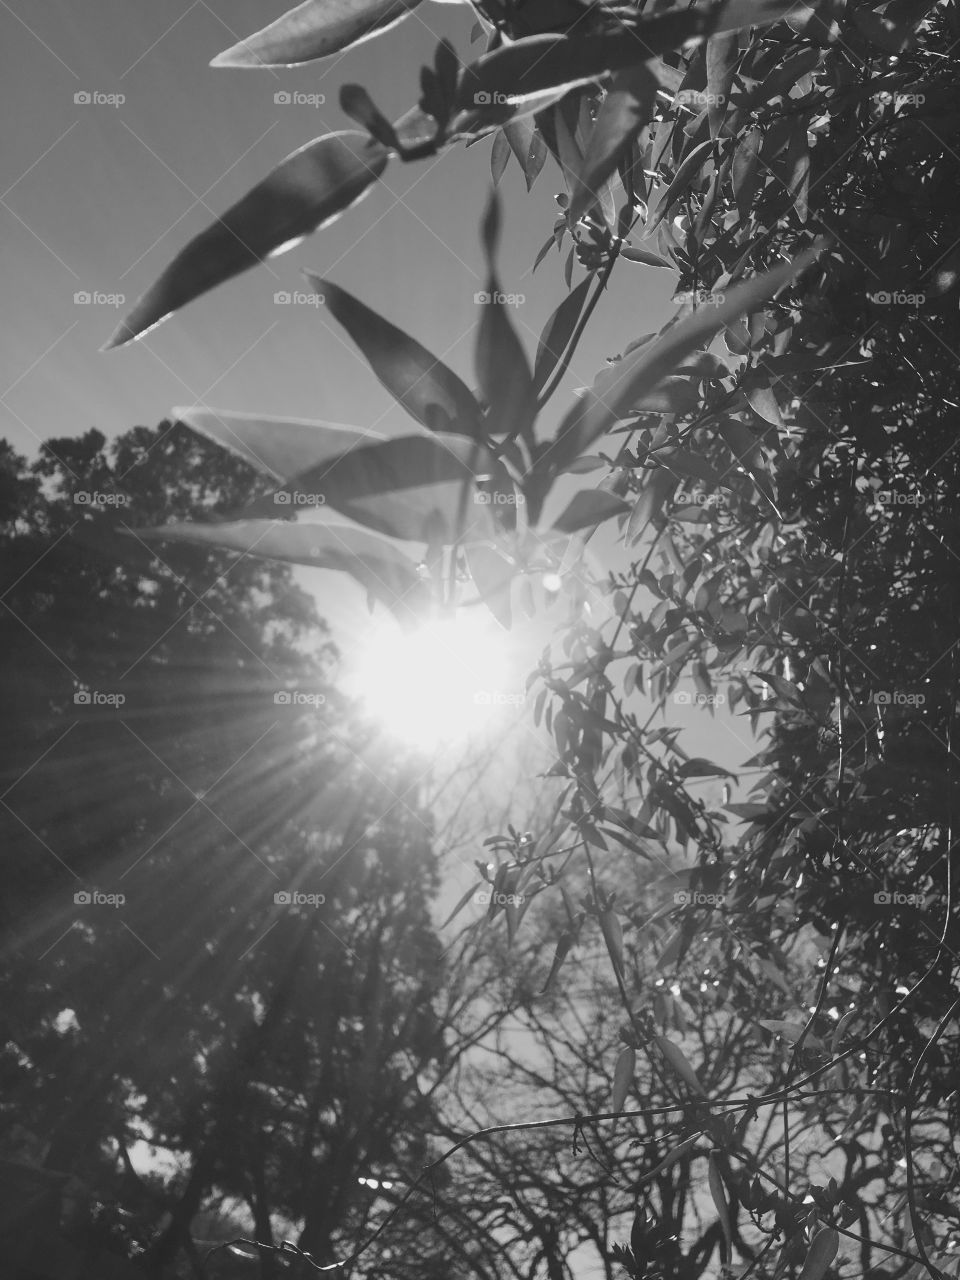 A picture taken under a tree to see the sun